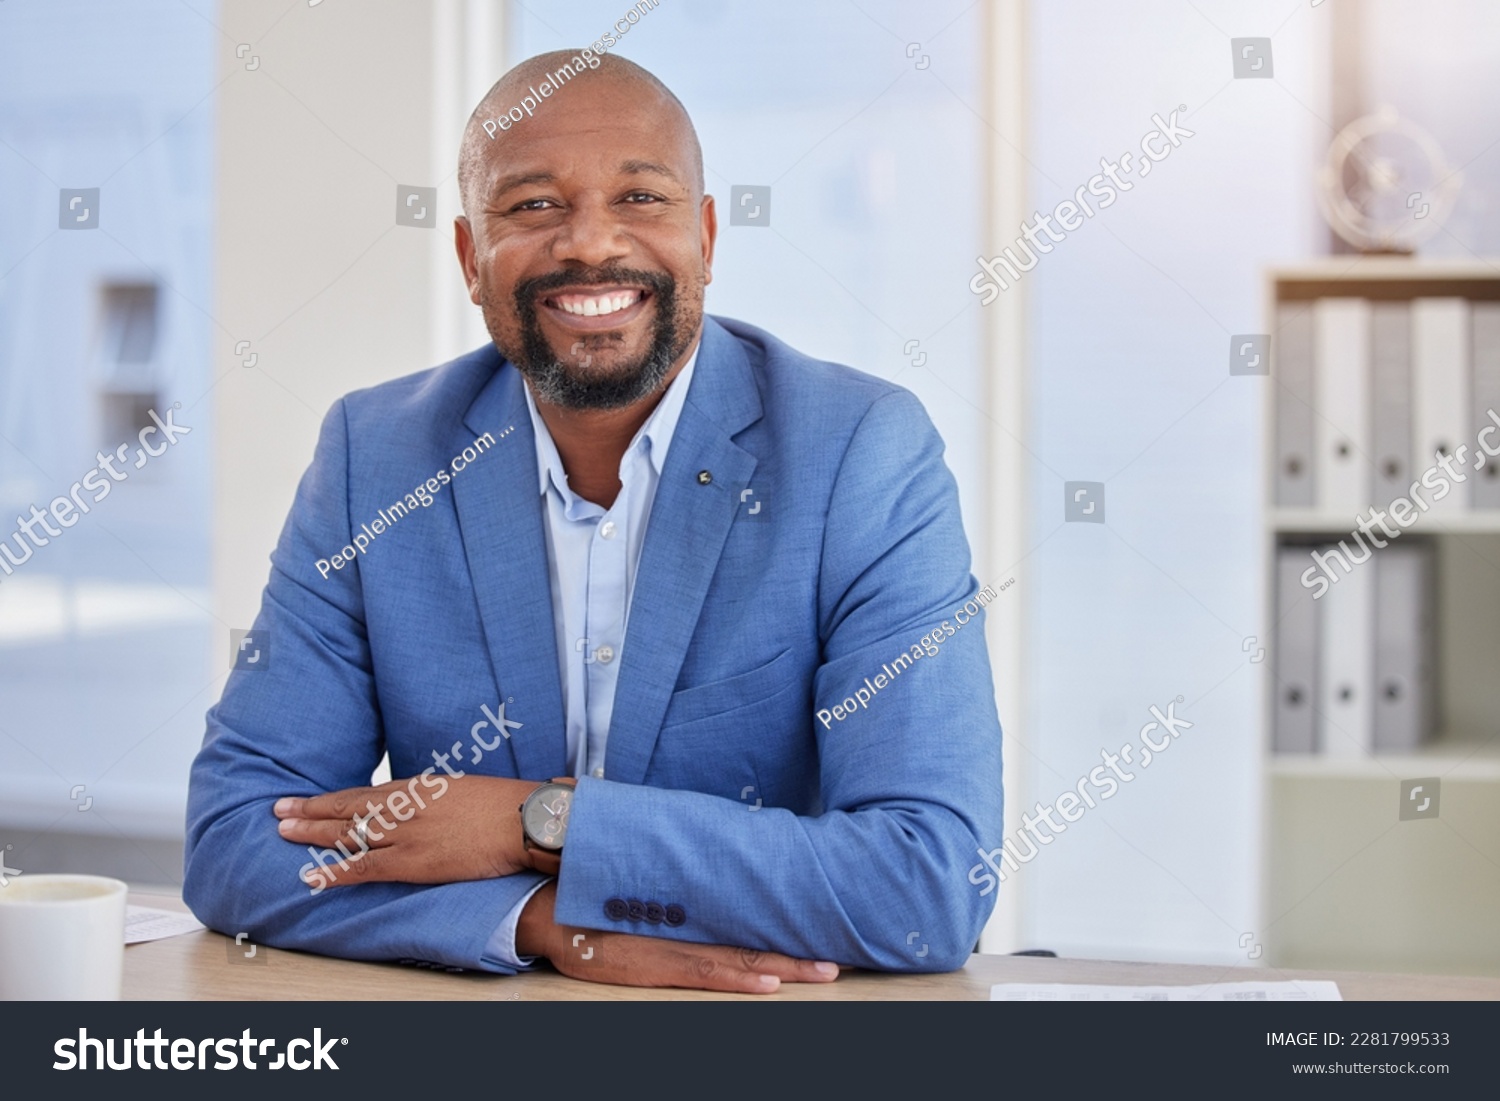 Happy black man, mature or portrait in finance office about us, company profile picture or CEO introduction. Smile, corporate or management person with business investment, savings or financial ideas #2281799533